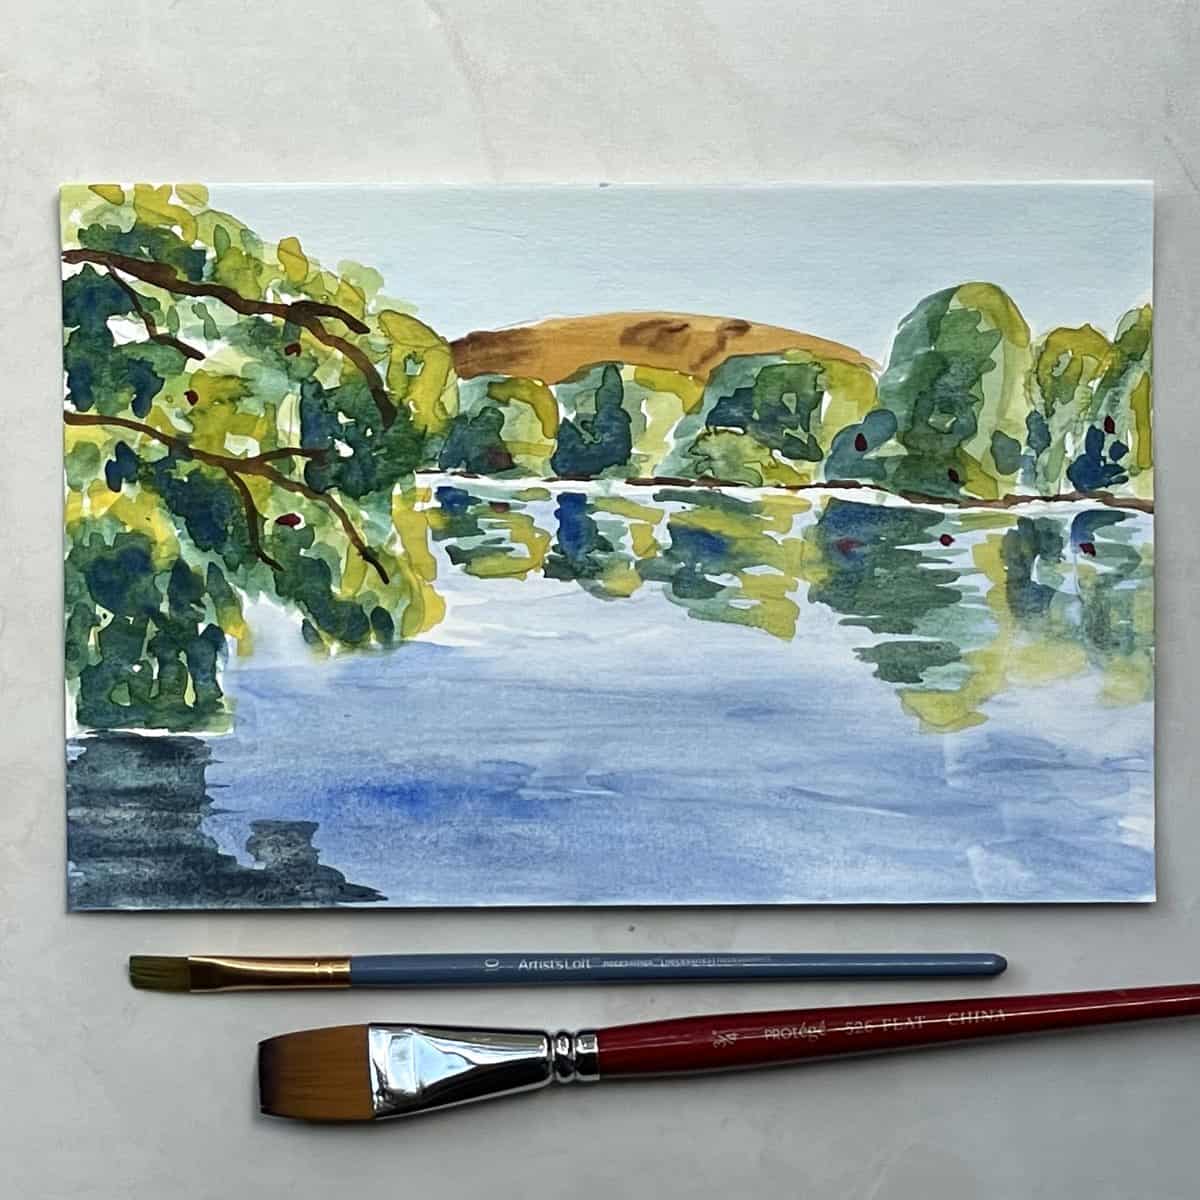 Painting of a watercolor lake scene with trees, a hill and reflections on the water next to paint brushes.